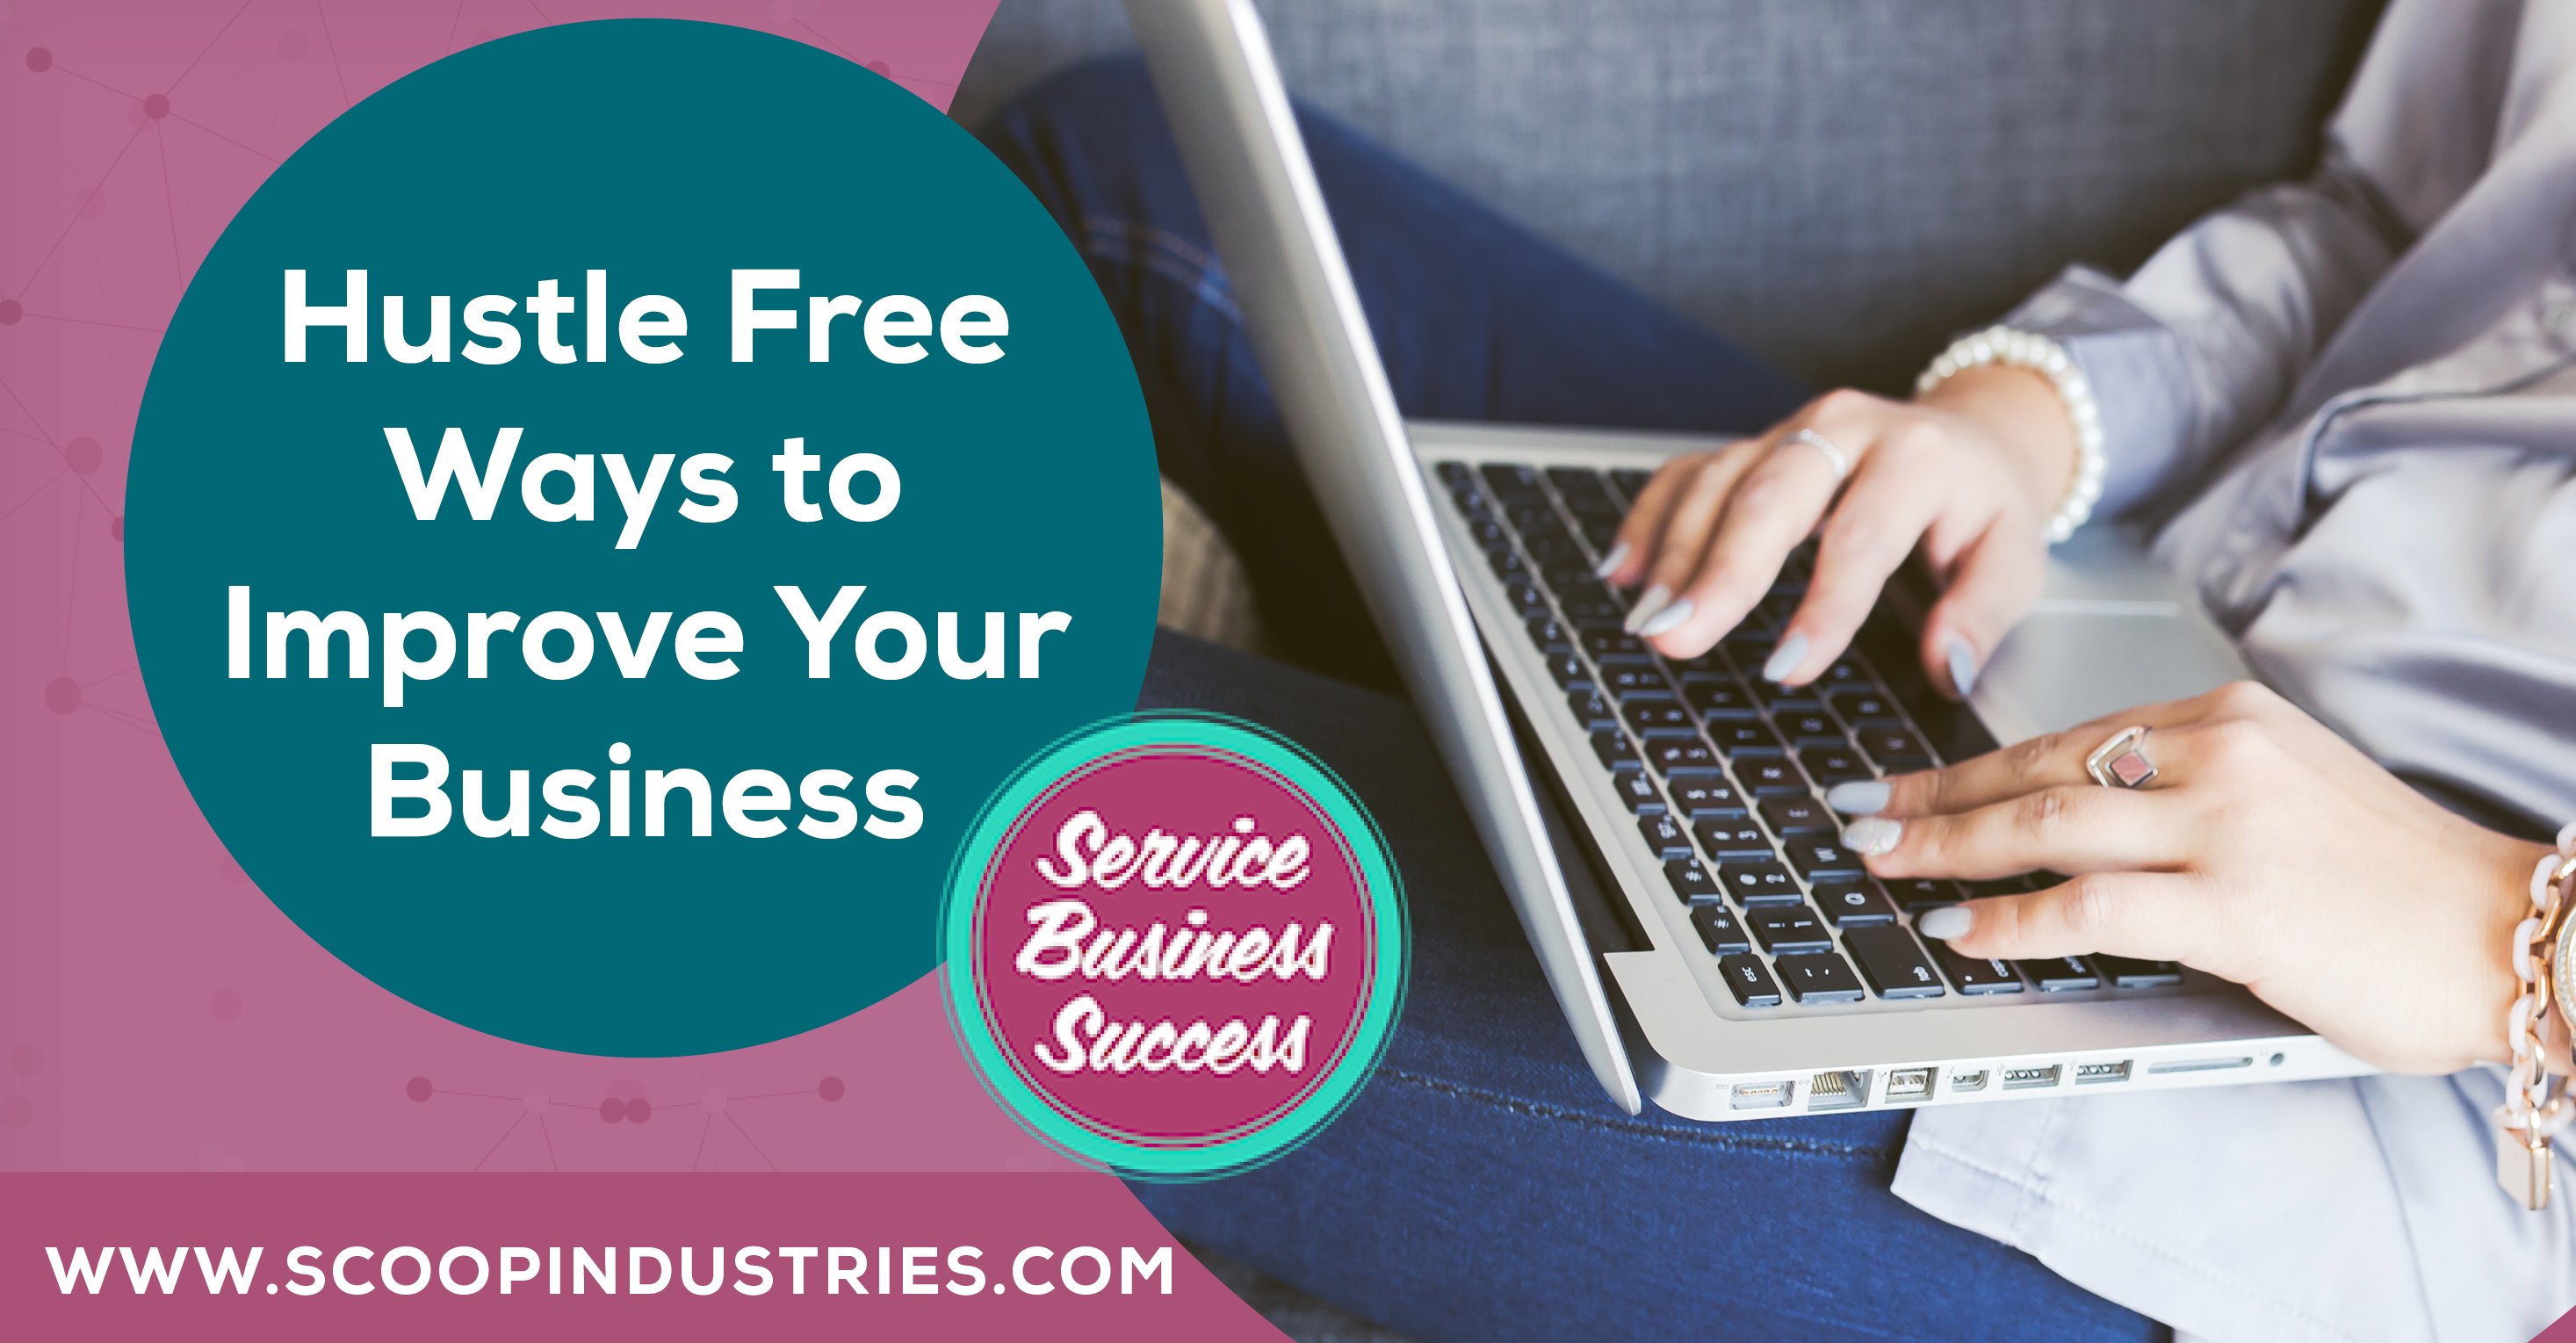 Episode 56: Hustle Free Ways to Improve Your Business